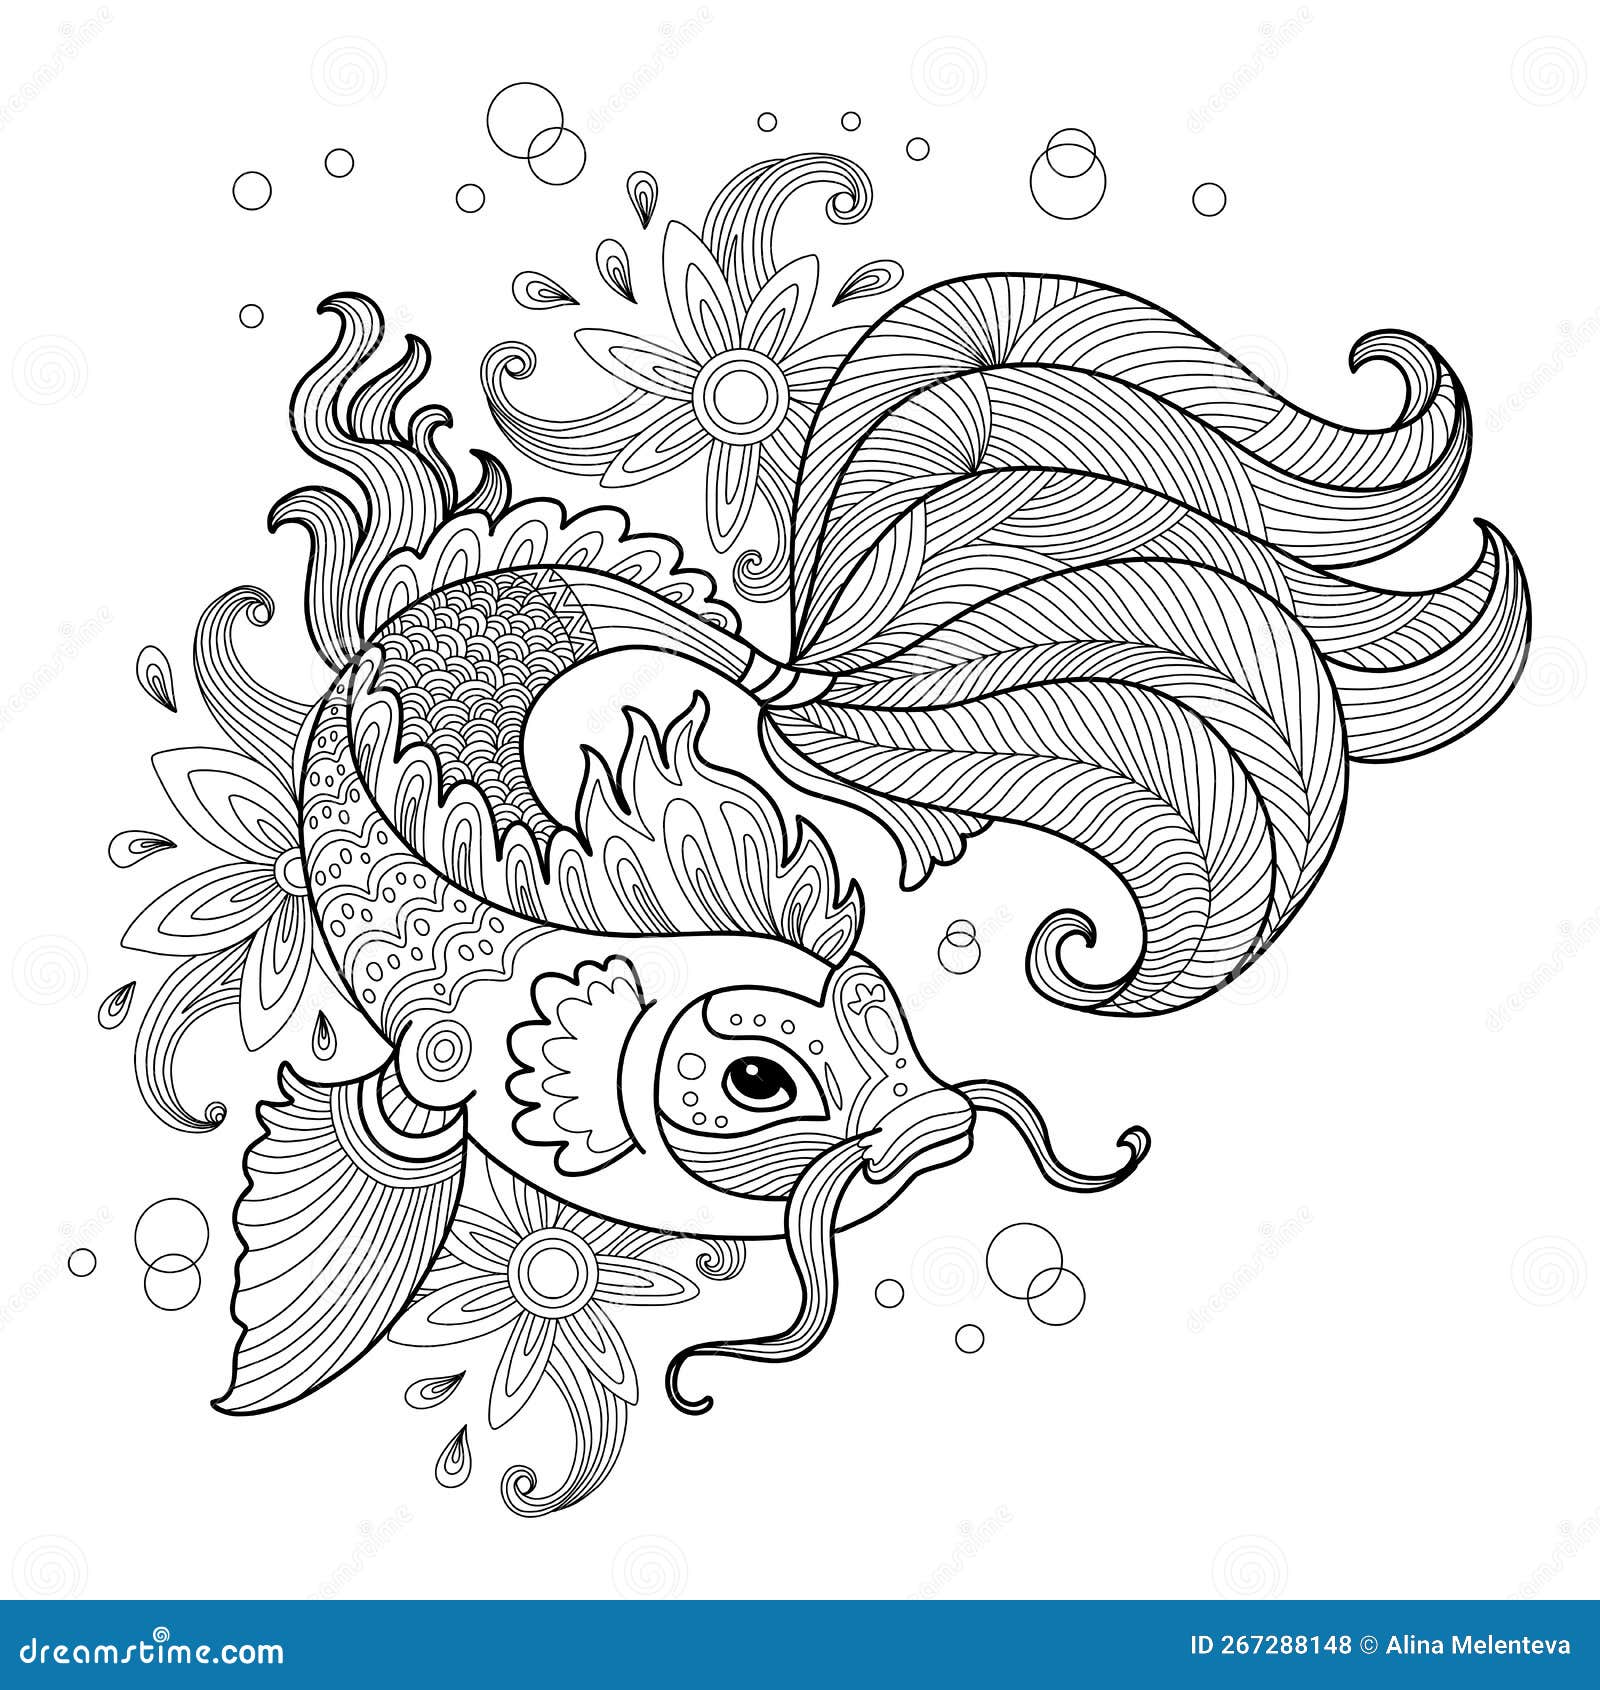 Golden Fish Adult Antistress Coloring Page Vector Stock Vector ...